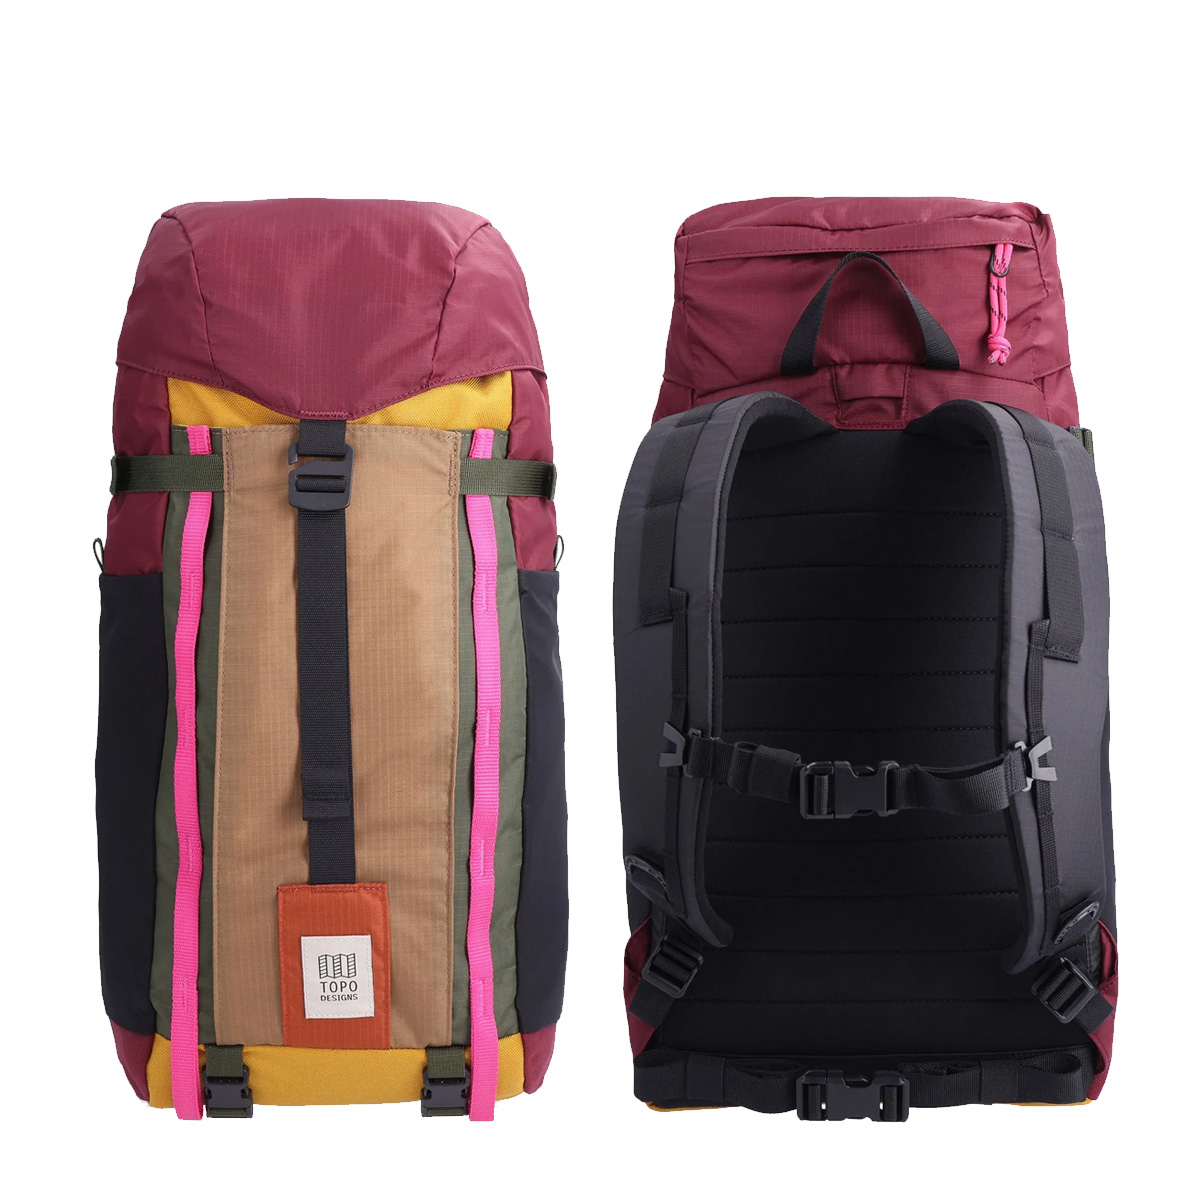 Topo Designs Mountain Pack 16L Burgundy/Dark Khaki, front and back